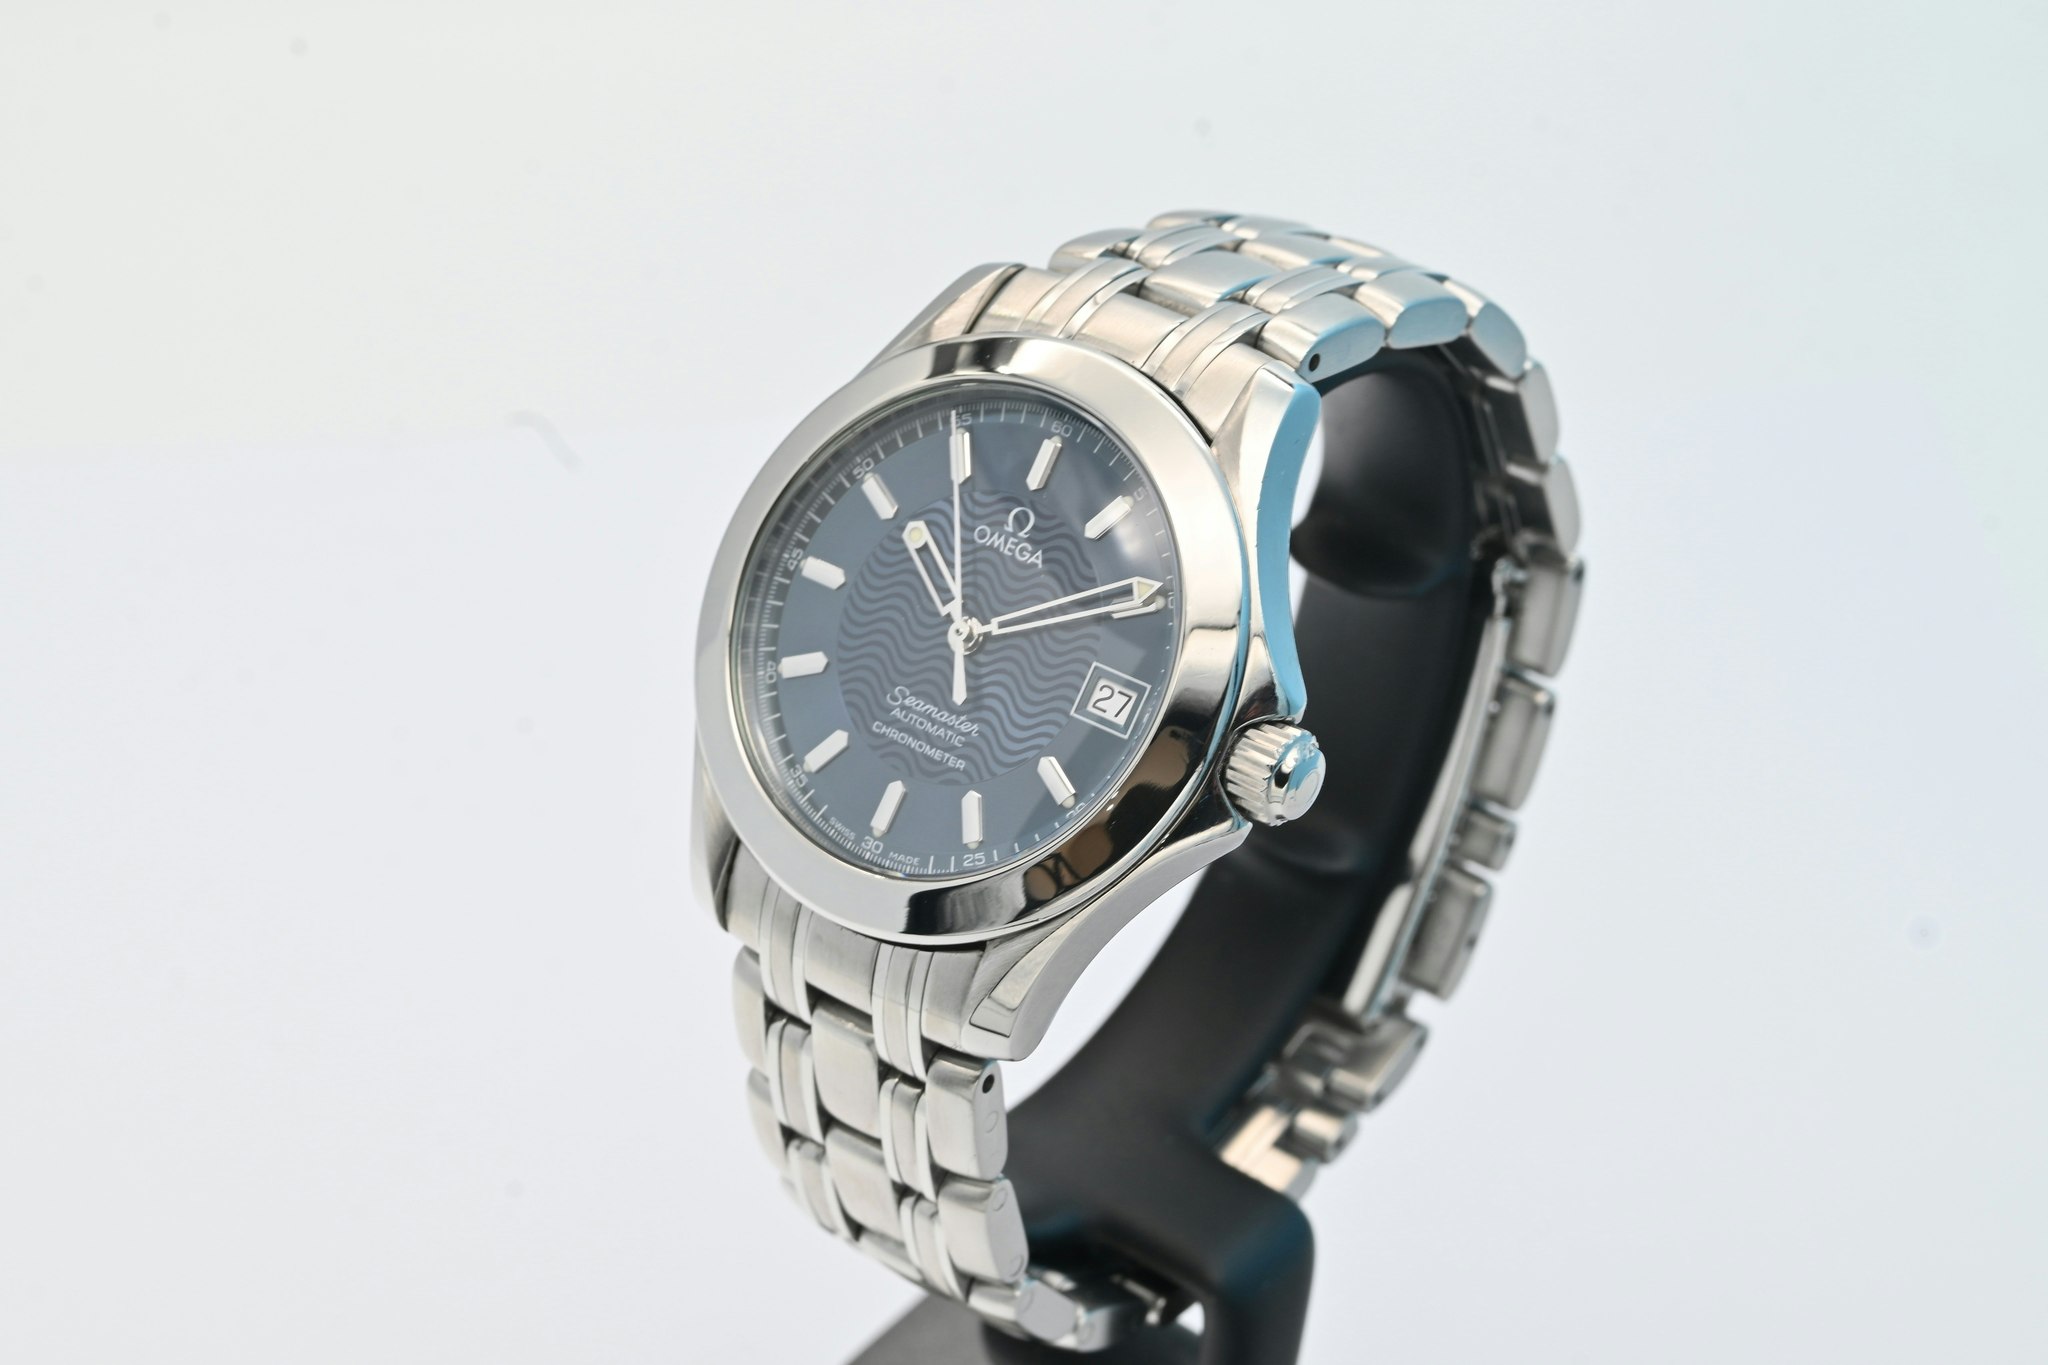 Omega Seamaster 120M Box, Tag and Papers - 719